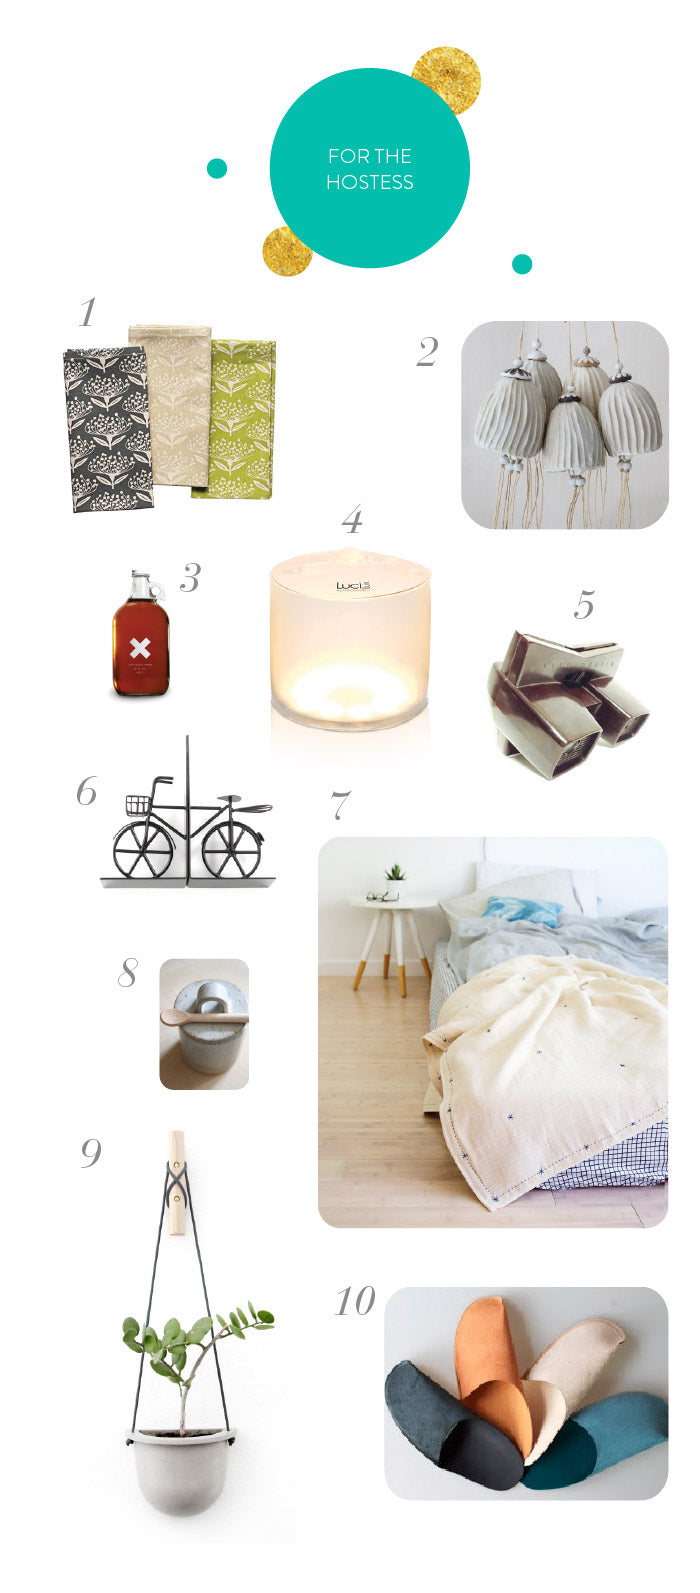 Top 10 Conscious Gifts for the Home